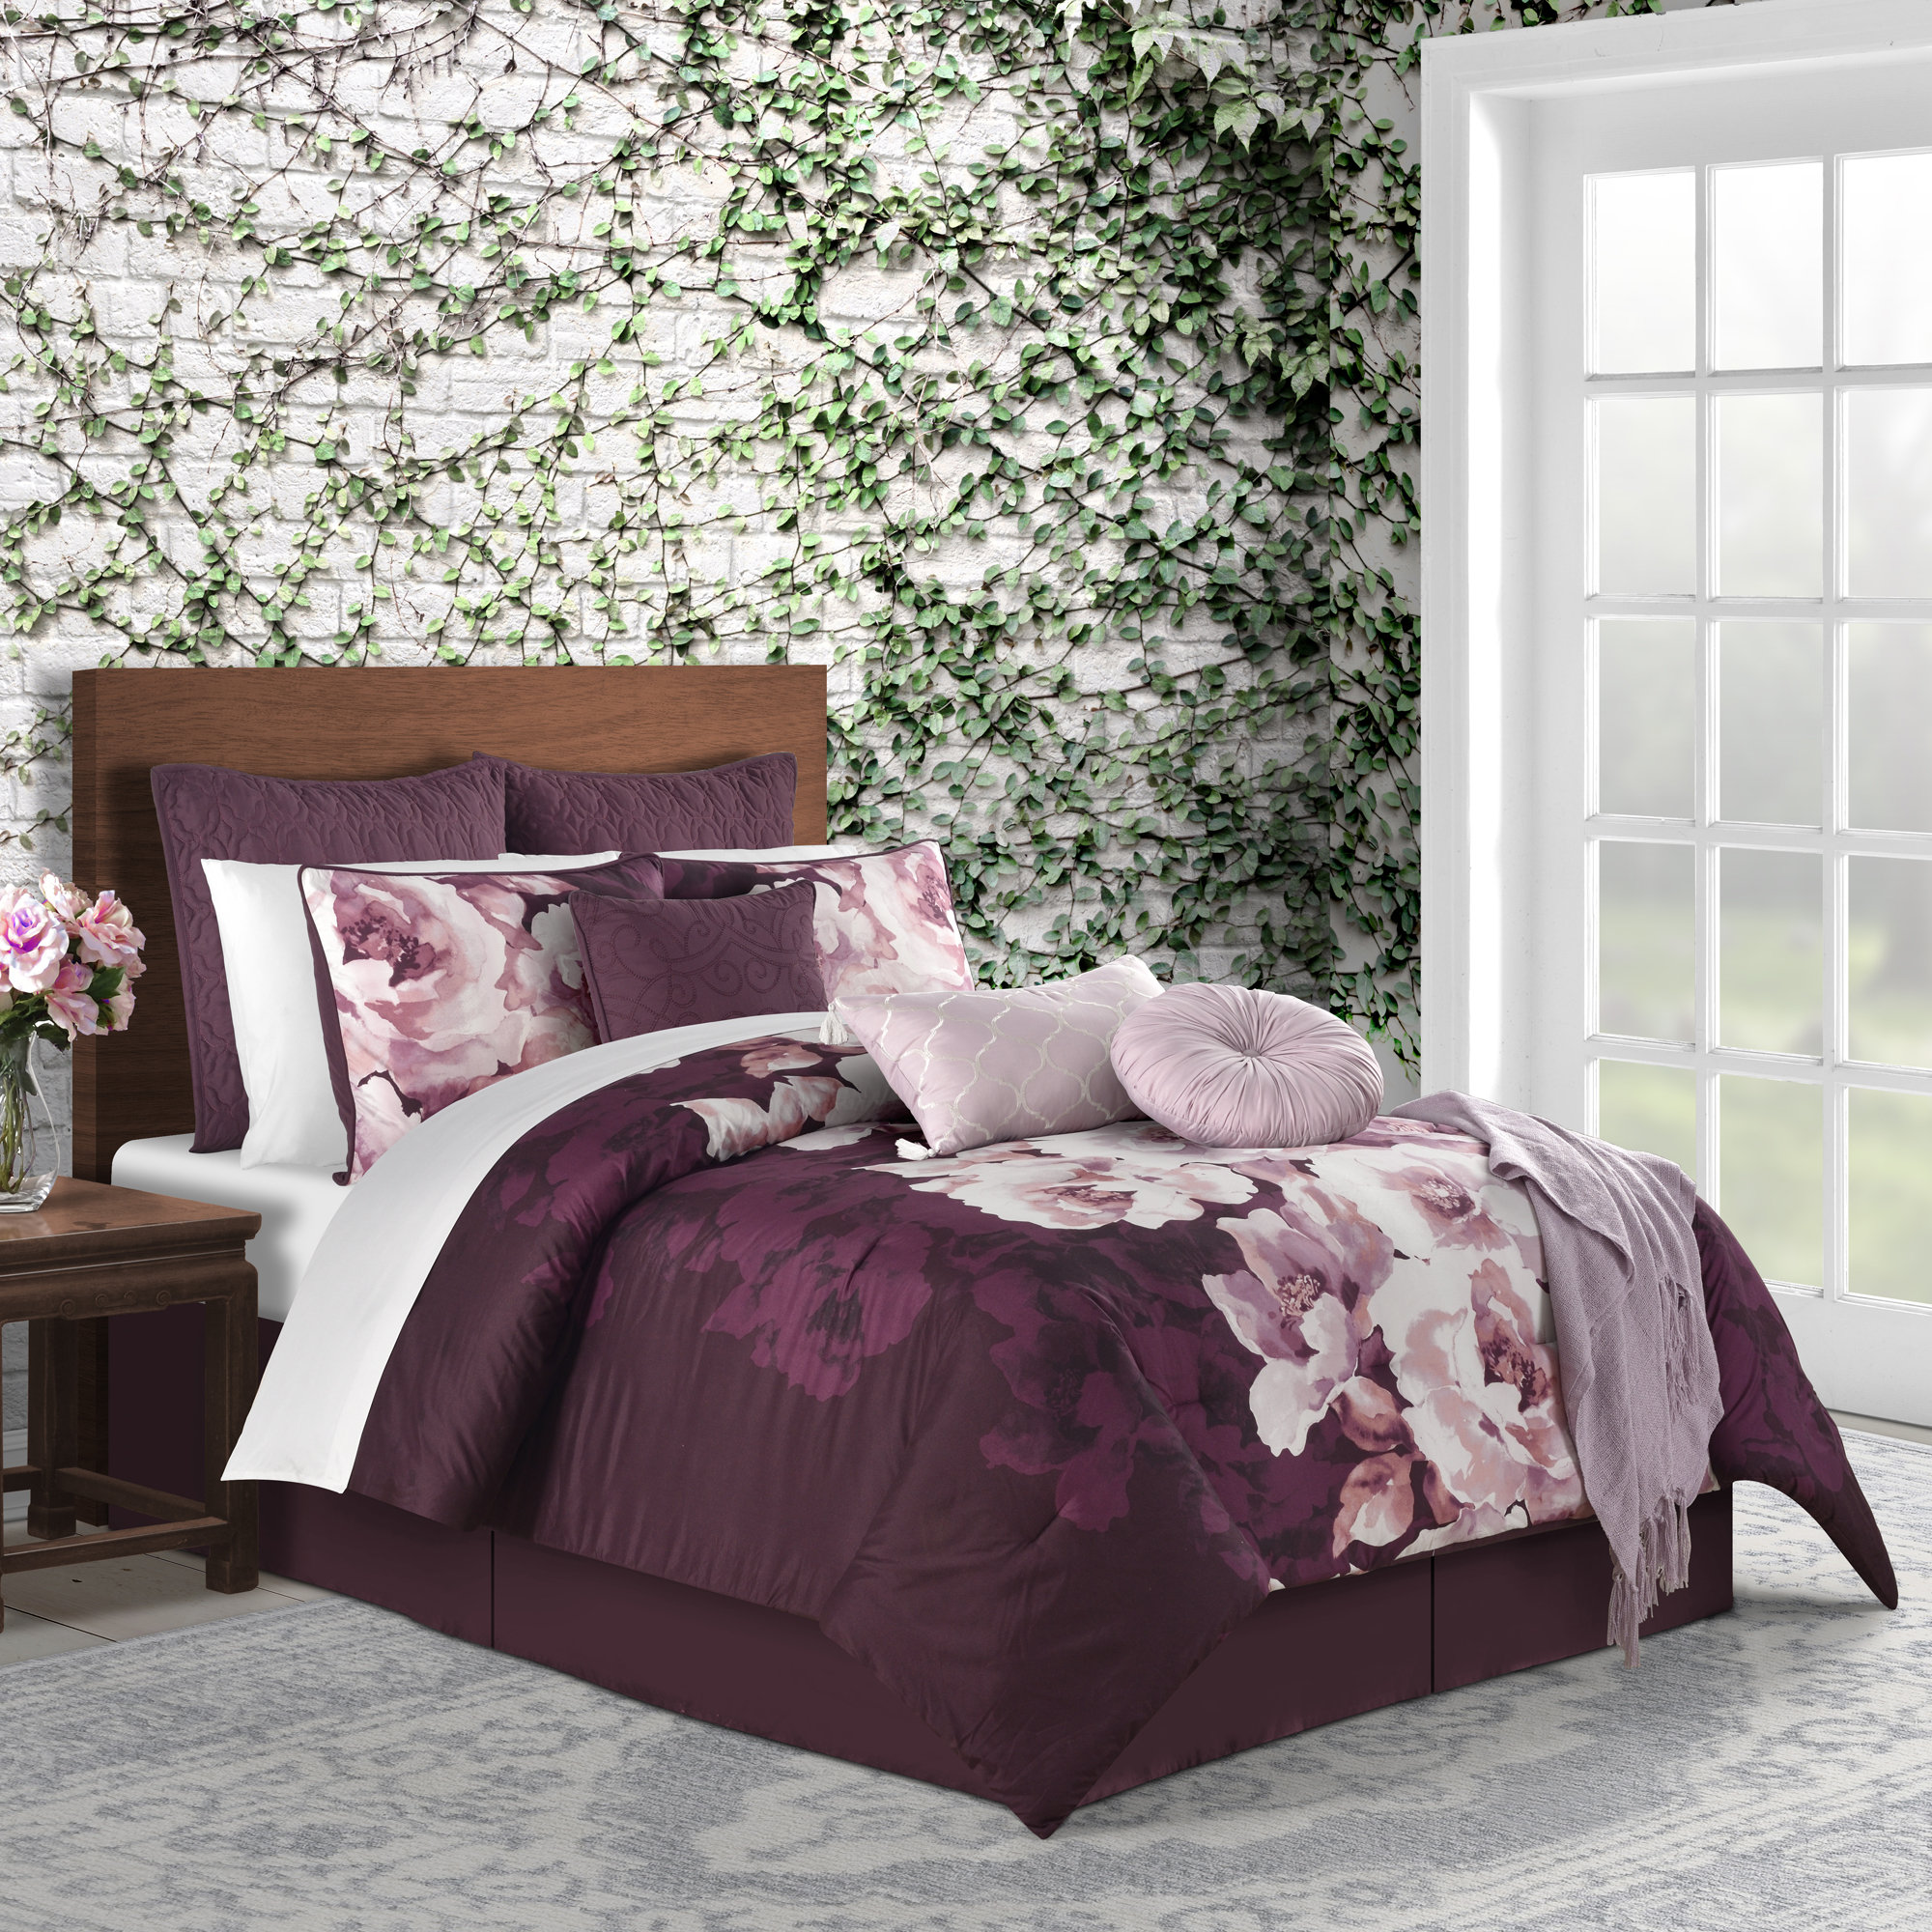 Lily Peony Louis Vuitton Bedding Sets Bed Sets, Bedroom Sets